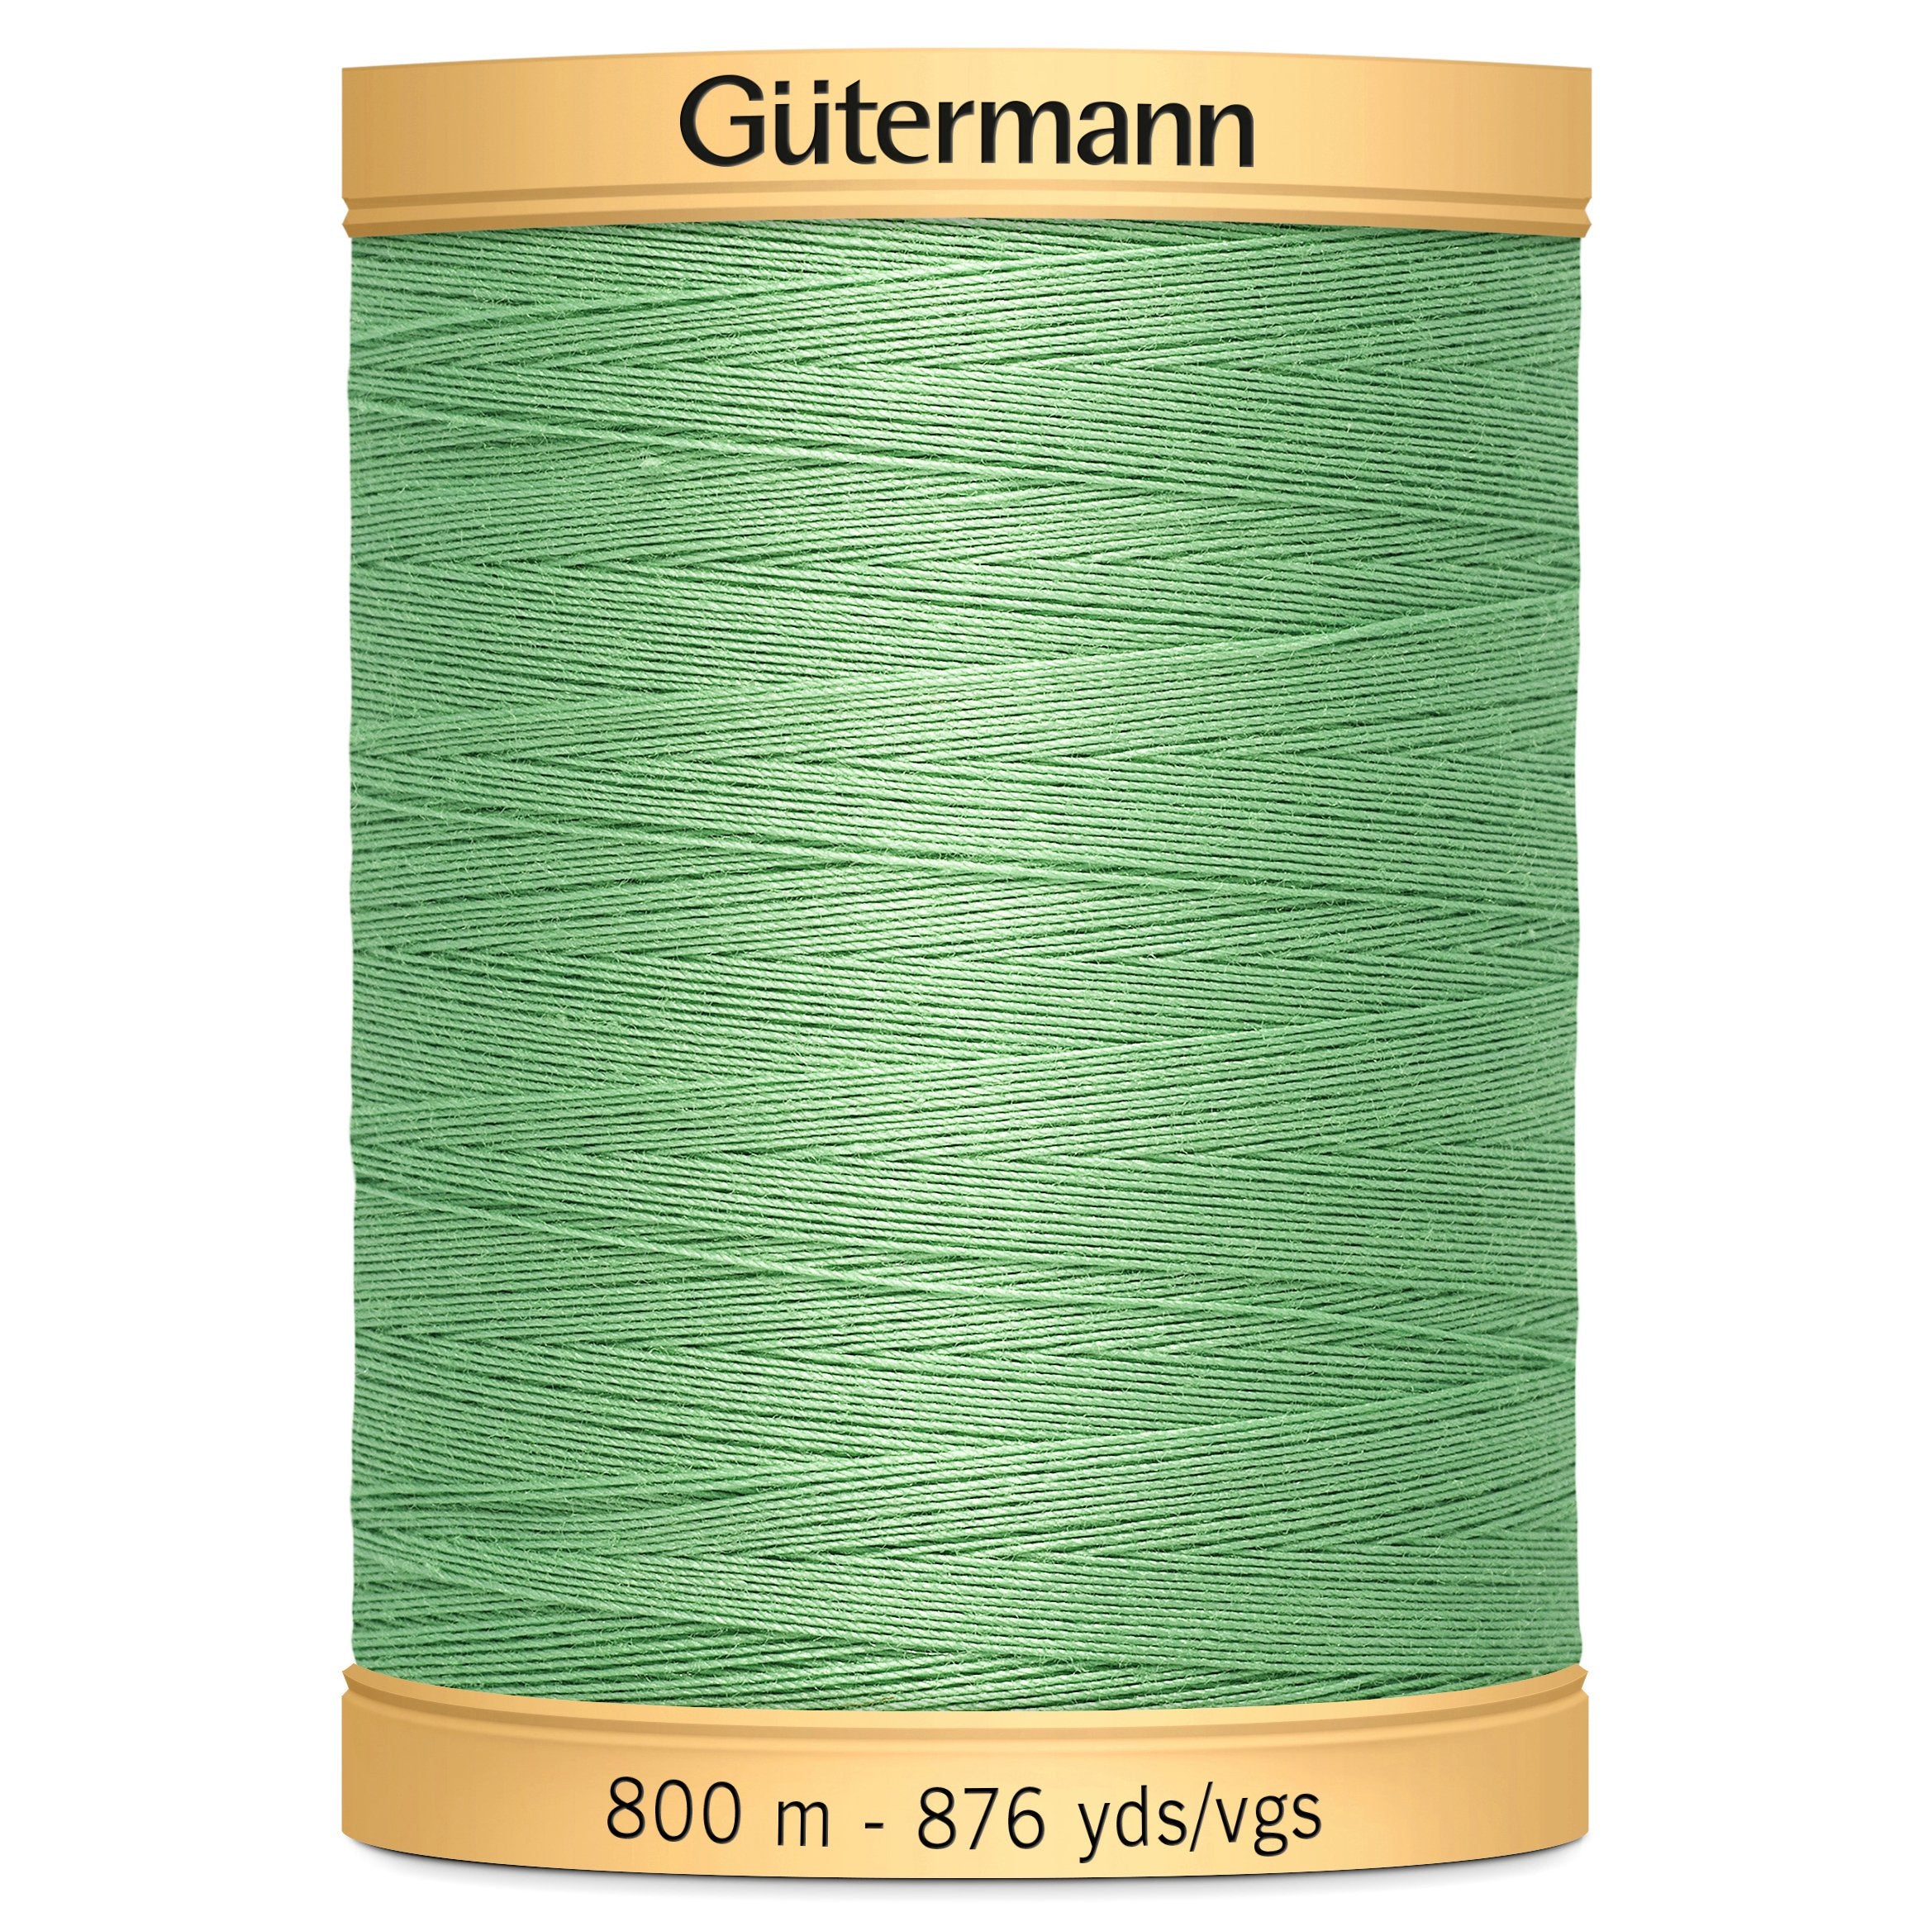 Gutermann Natural Cotton - 7880 from Jaycotts Sewing Supplies